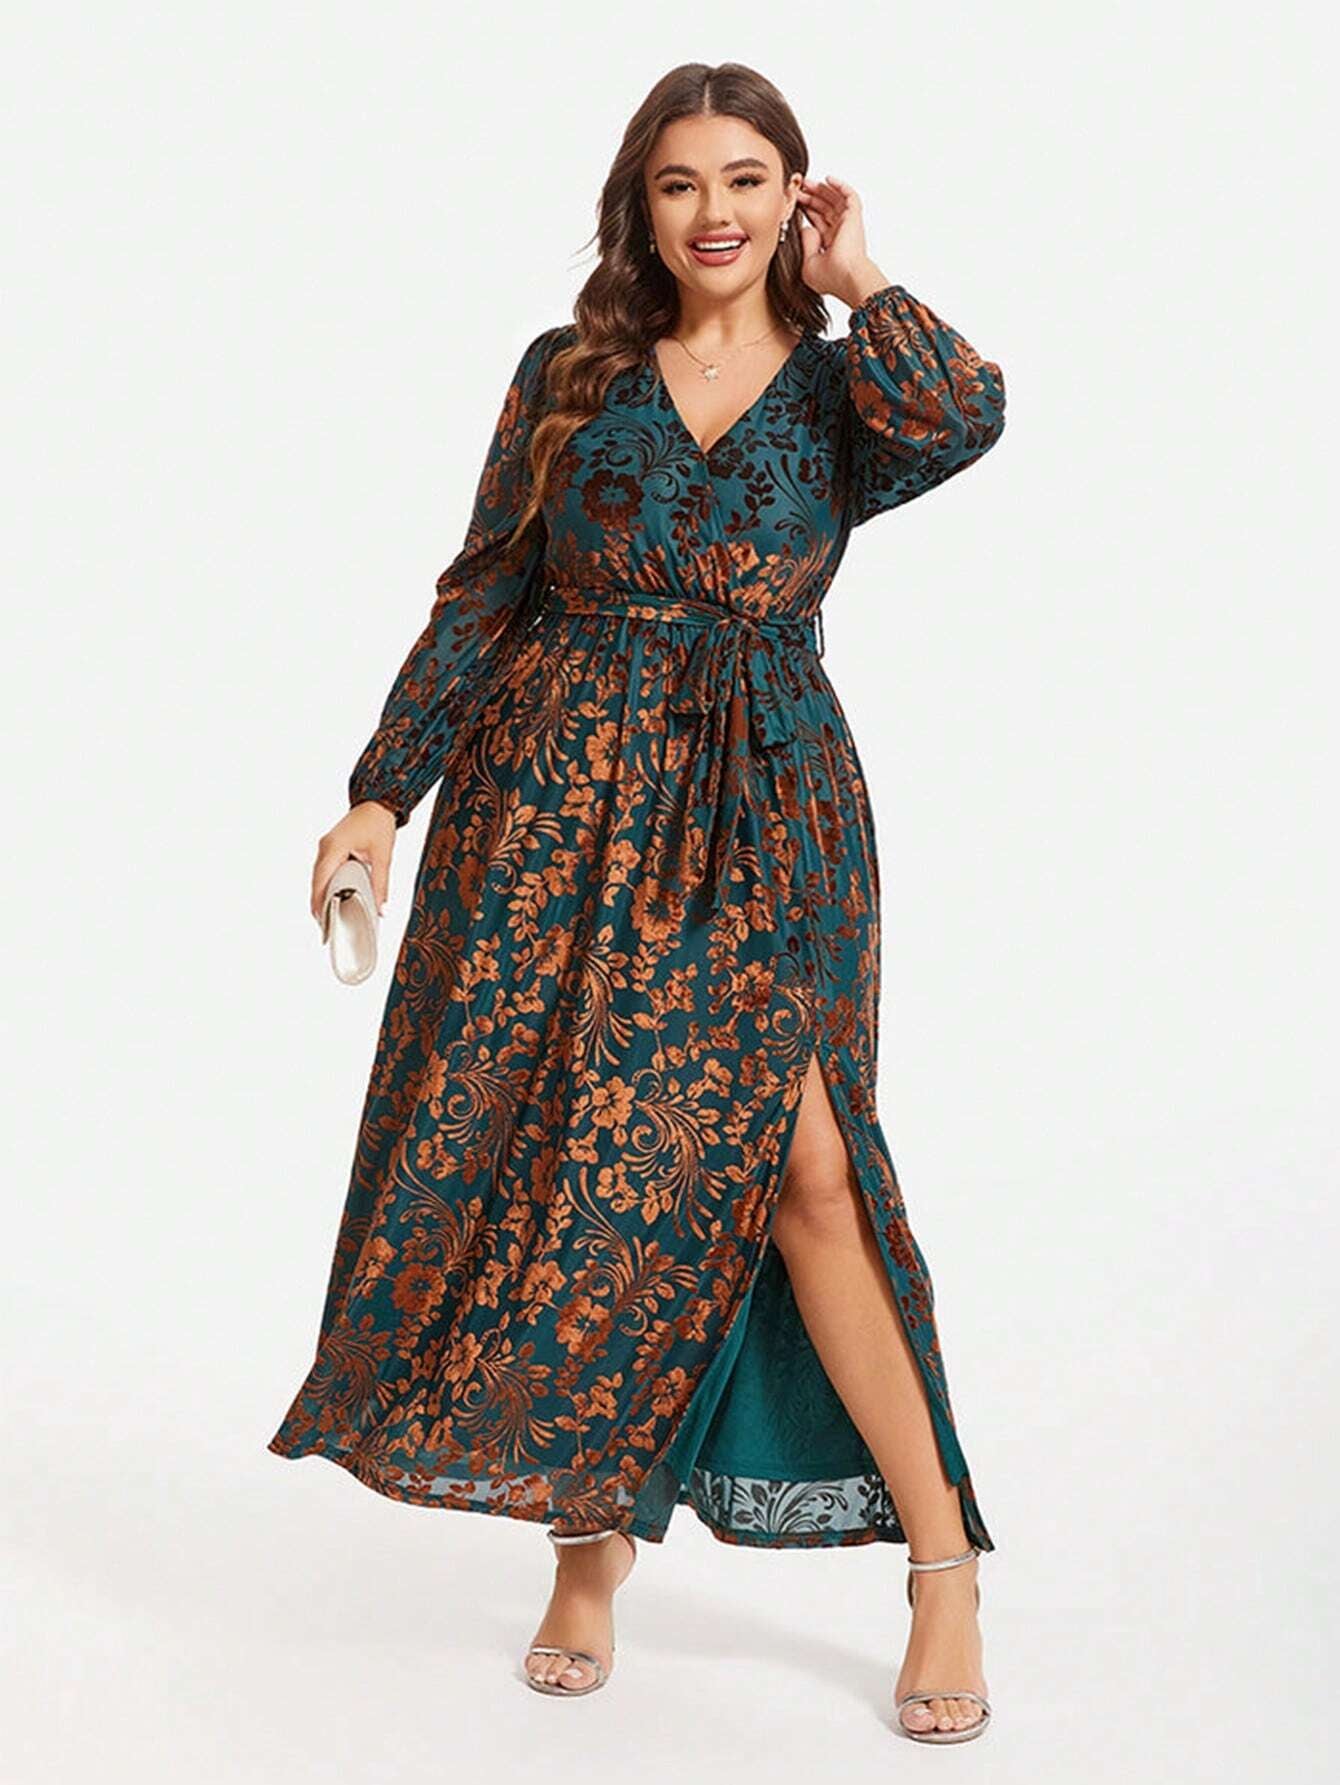 Elegant Velvet Floral Print Wrap Dress - Perfect for Every Occasion!